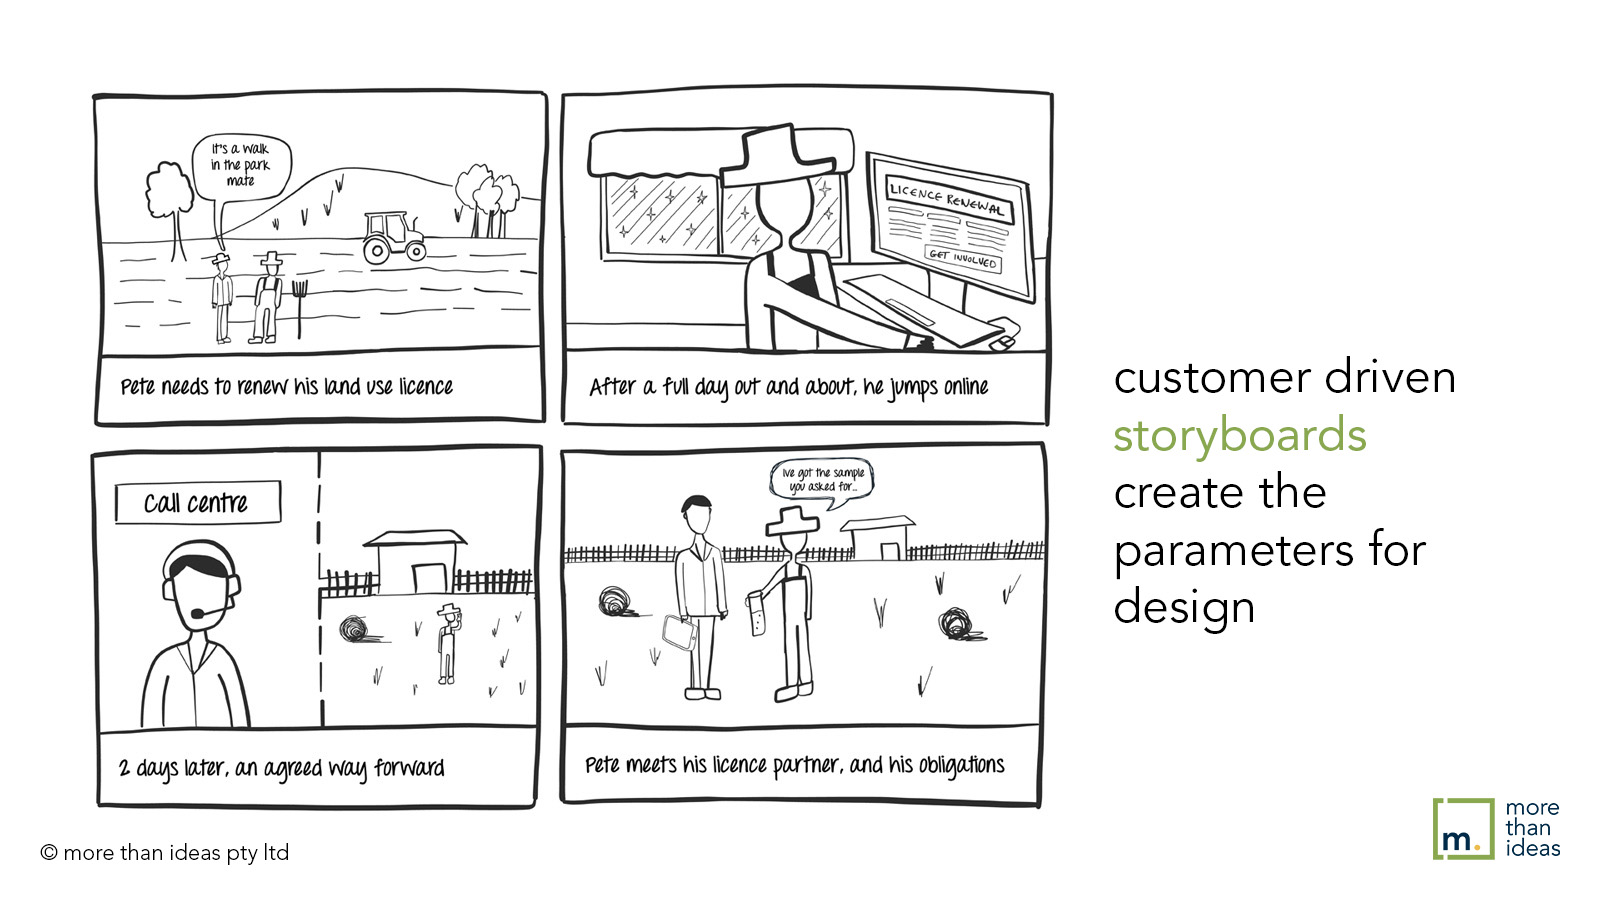 image with text "customer driven storyboards create the parameters for design."